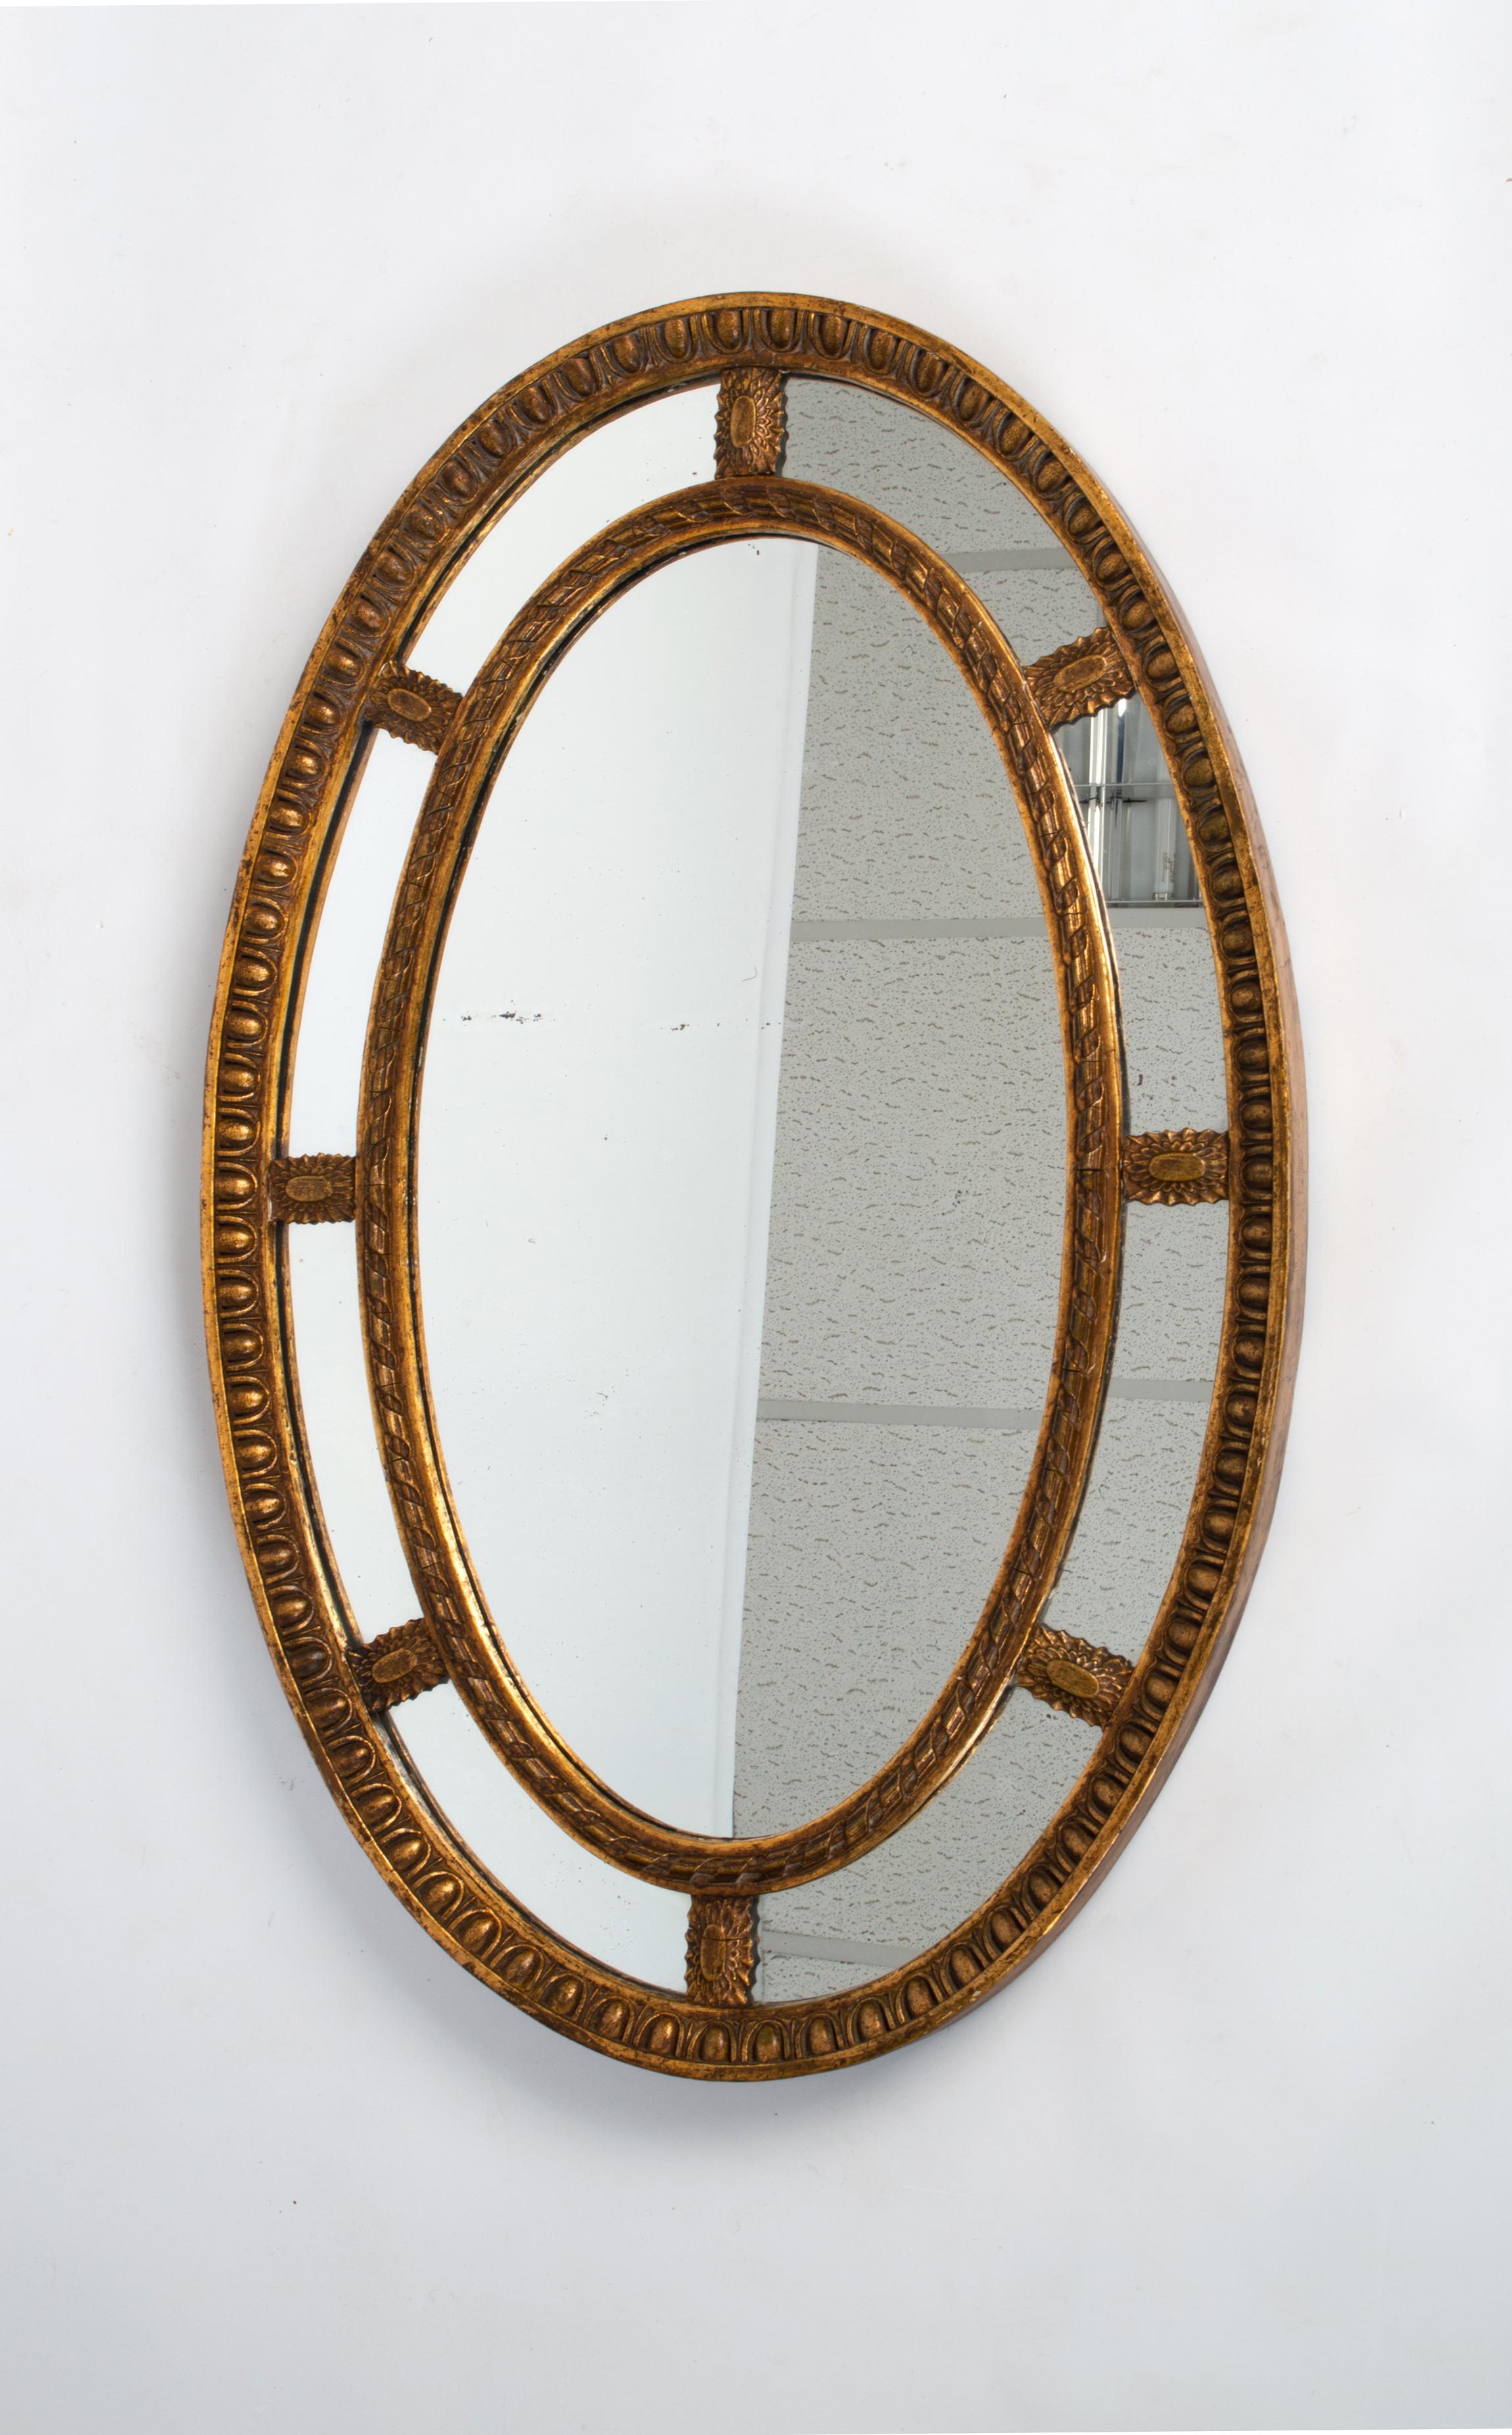 Large Antique English oval gilt-wood and gesso sectional mirror
Edwardian C.1910
A fine mirror in the neoclassic Adam's style.
Presented in excellent, gently worn condition commensurate of age.